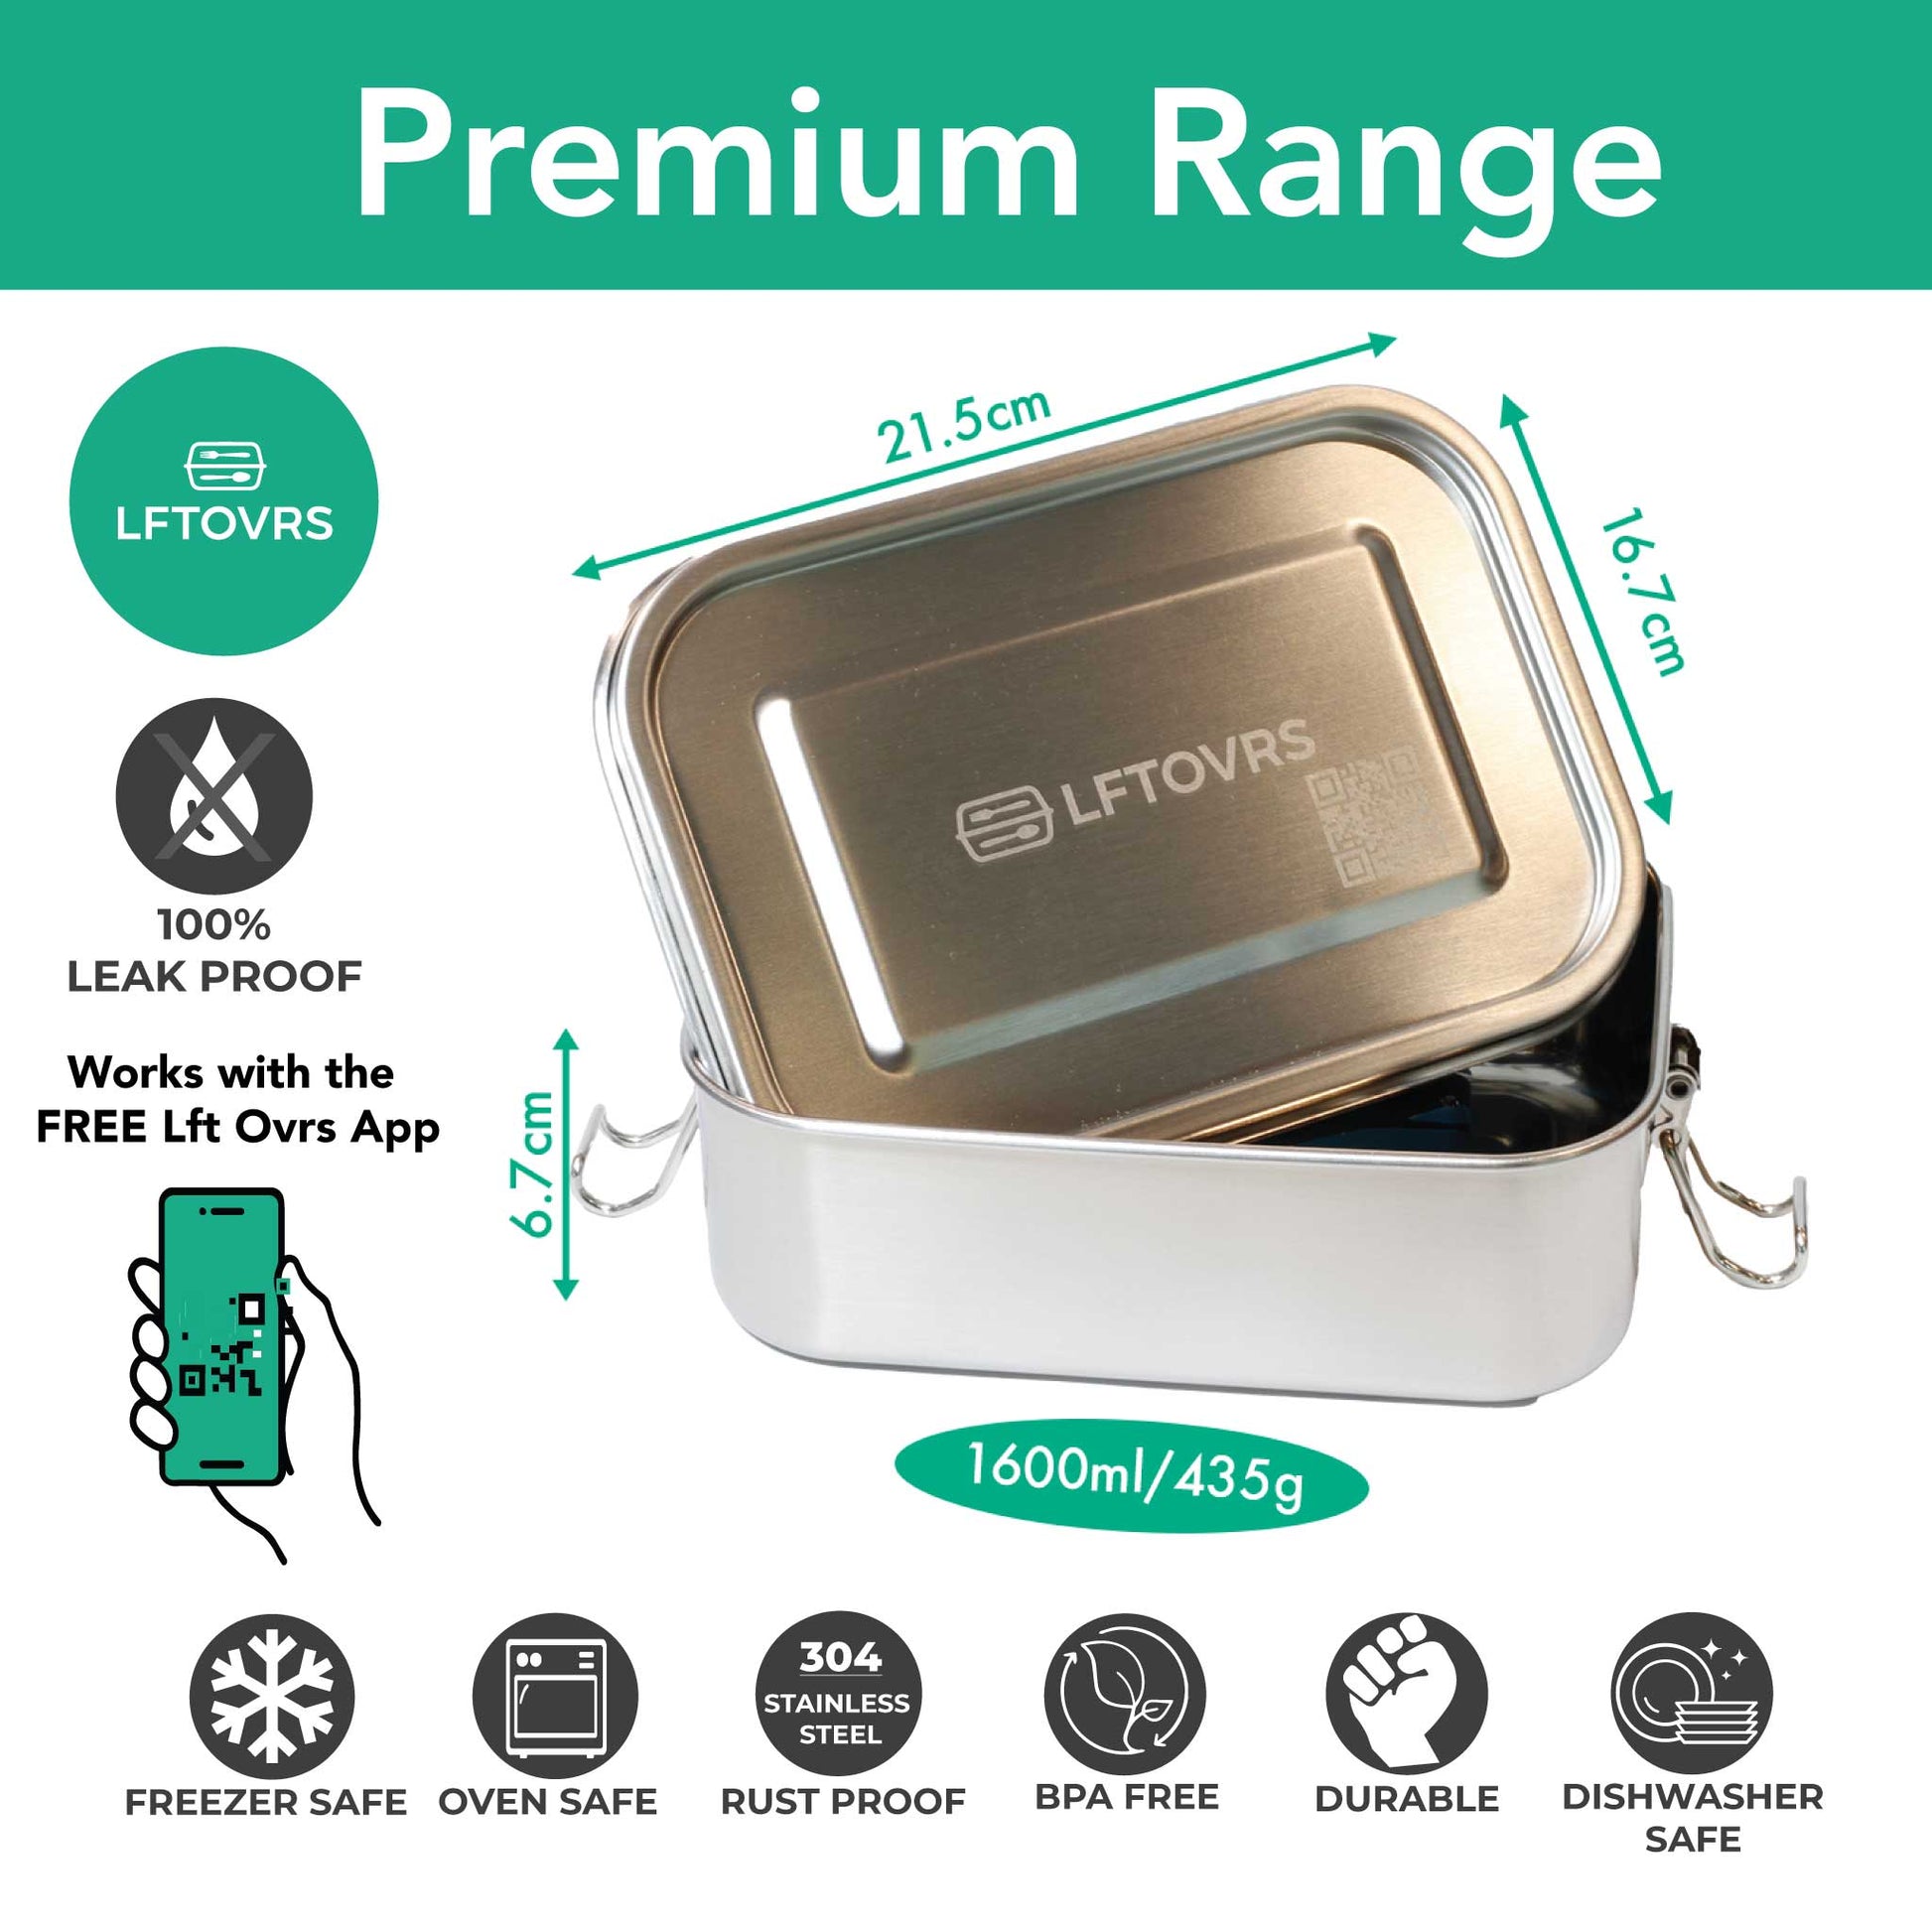 1600ml premium stainless steel lunch box features